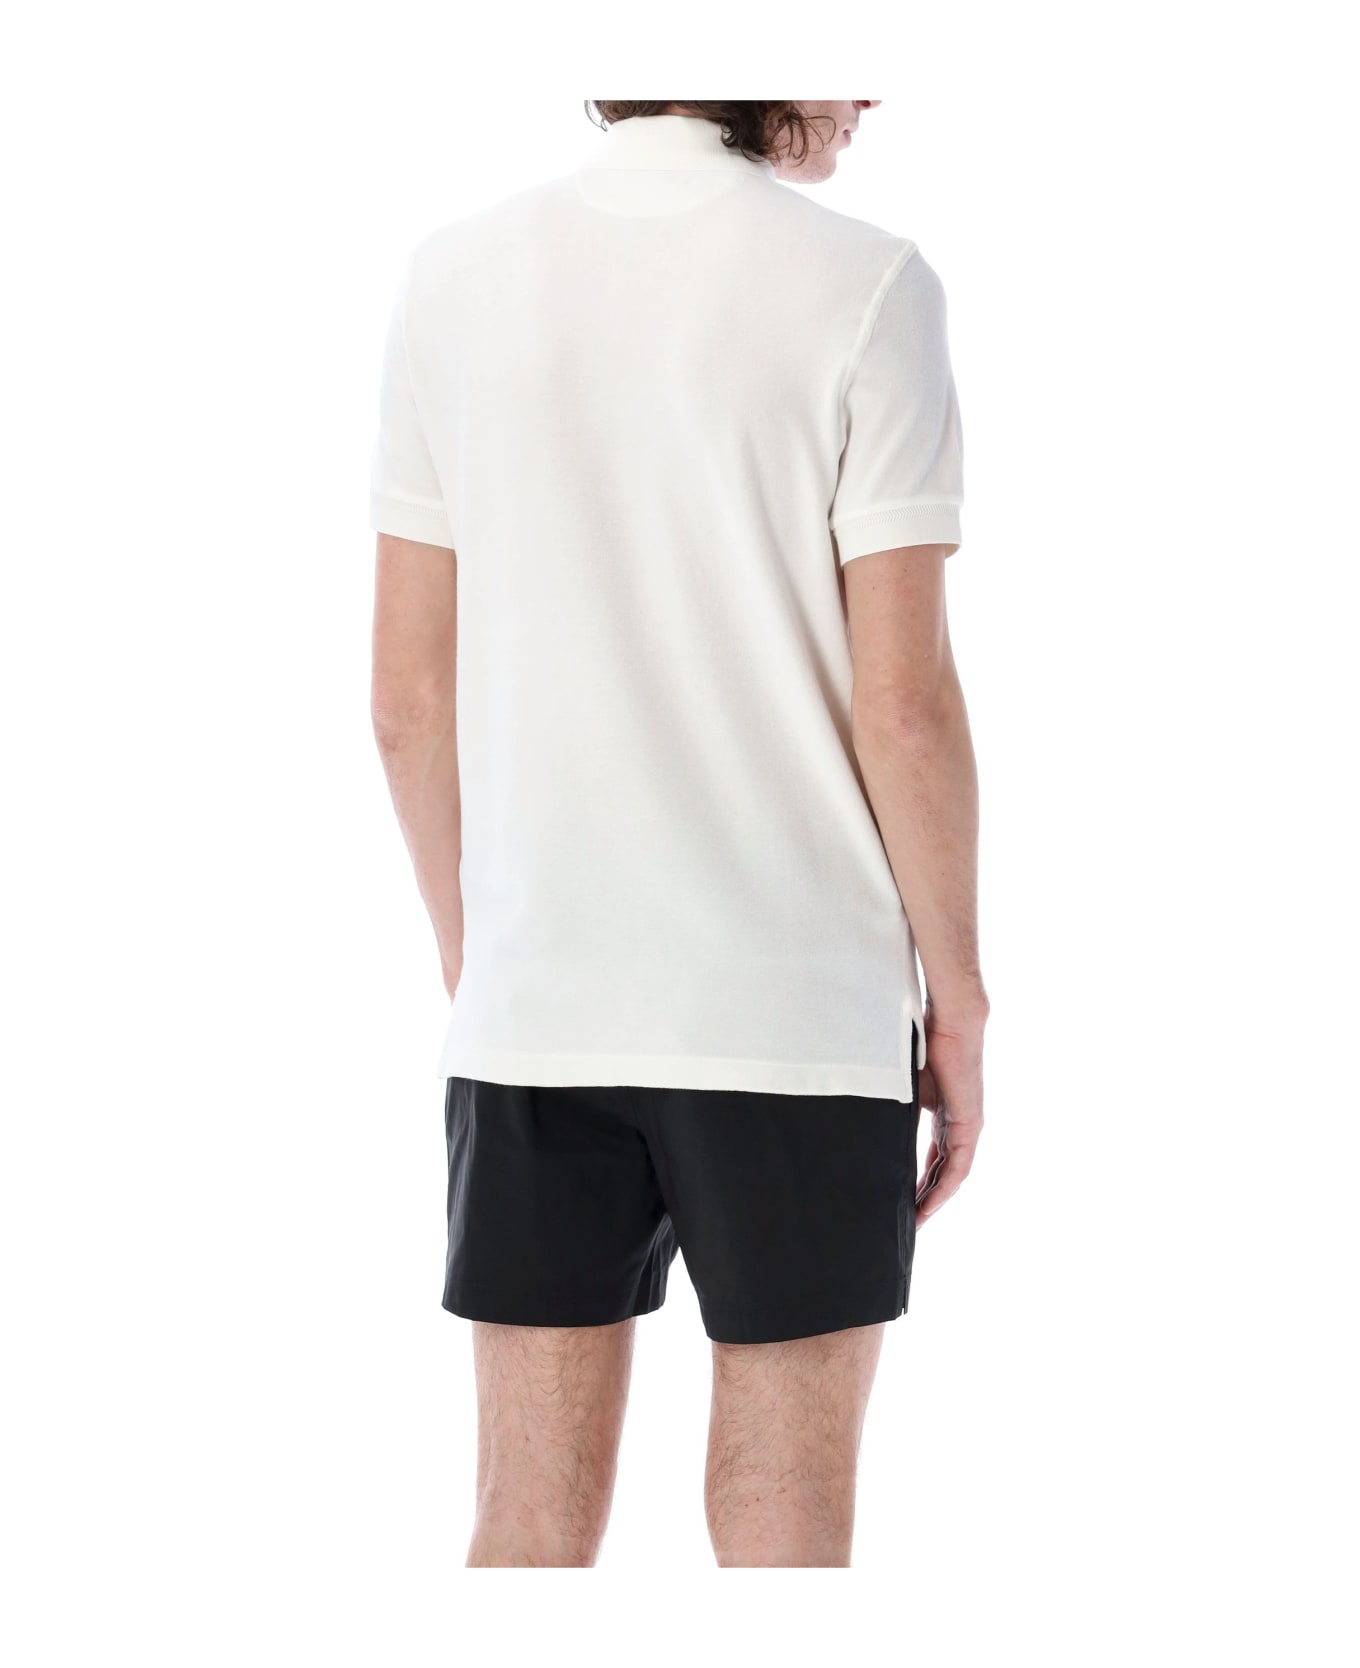 Tom Ford Towelling Polo - WHITE name:472